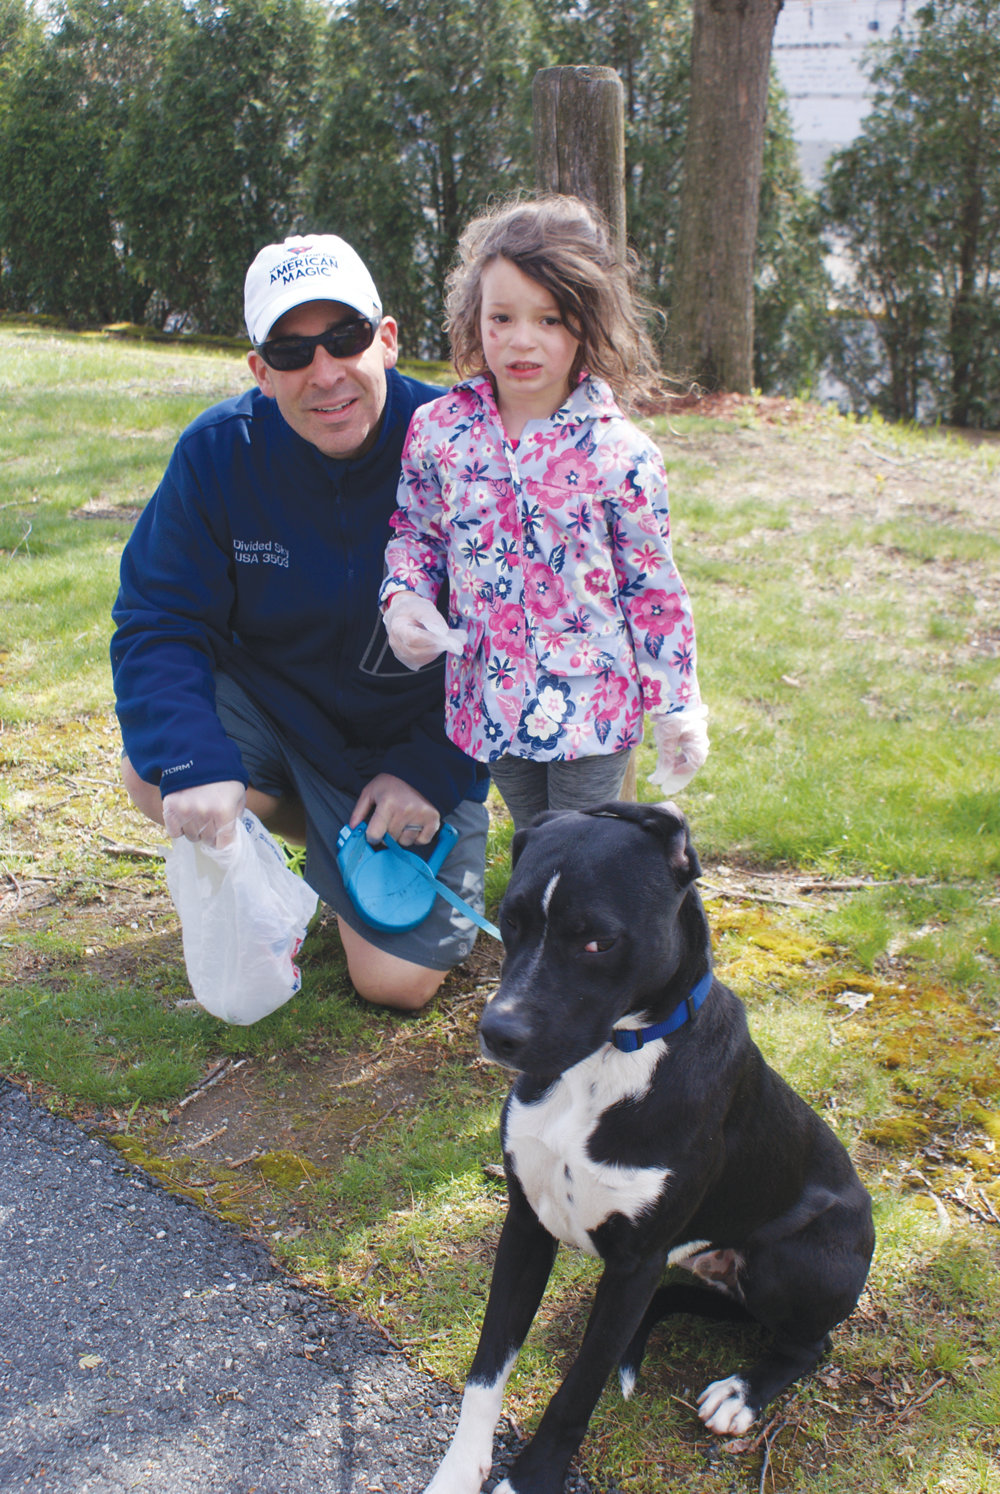 A FAMILY MATTER: Cranston Police Capt. Vin McAteer, his daughter, 3-year-old Helena, and their dog, Ranger, share a moment during the recent cleanup.